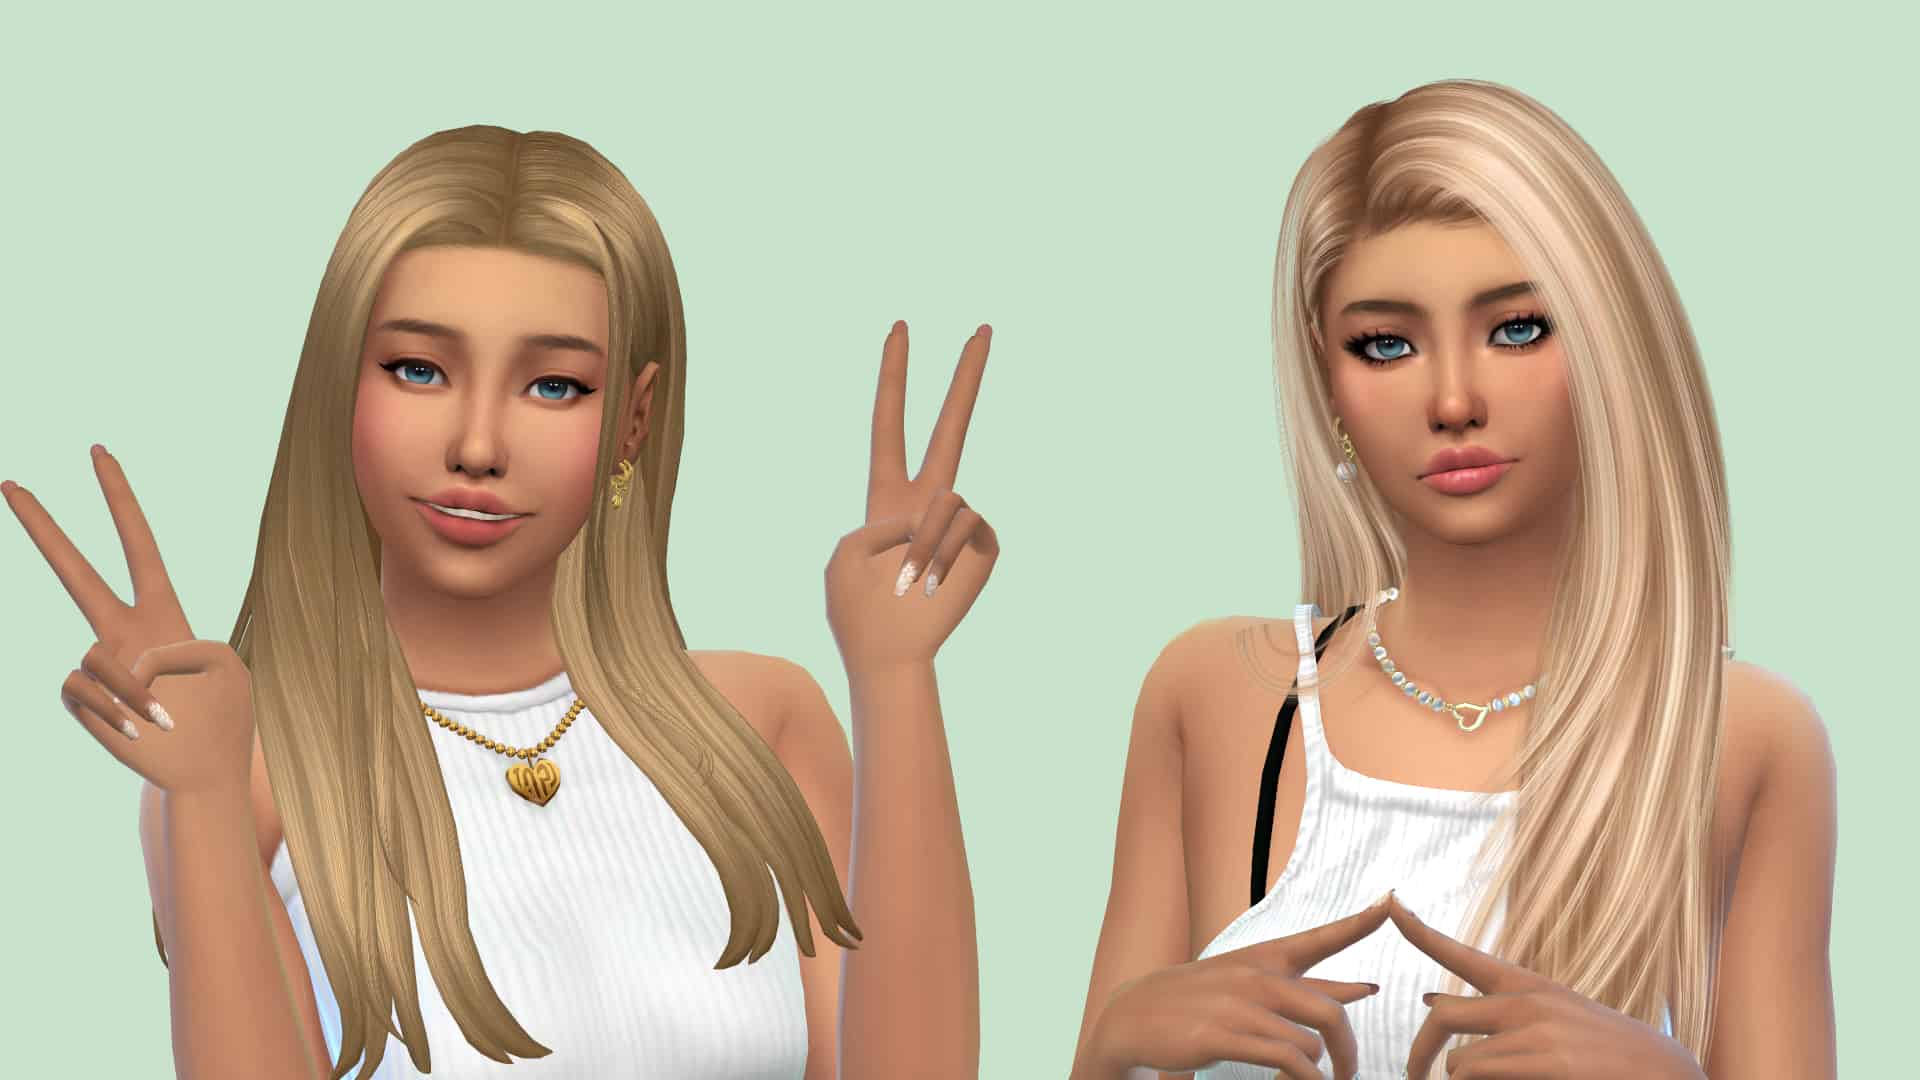 Sims 4 Packs - The Ultimate Guide To The Sims 4 DLCs — SNOOTYSIMS